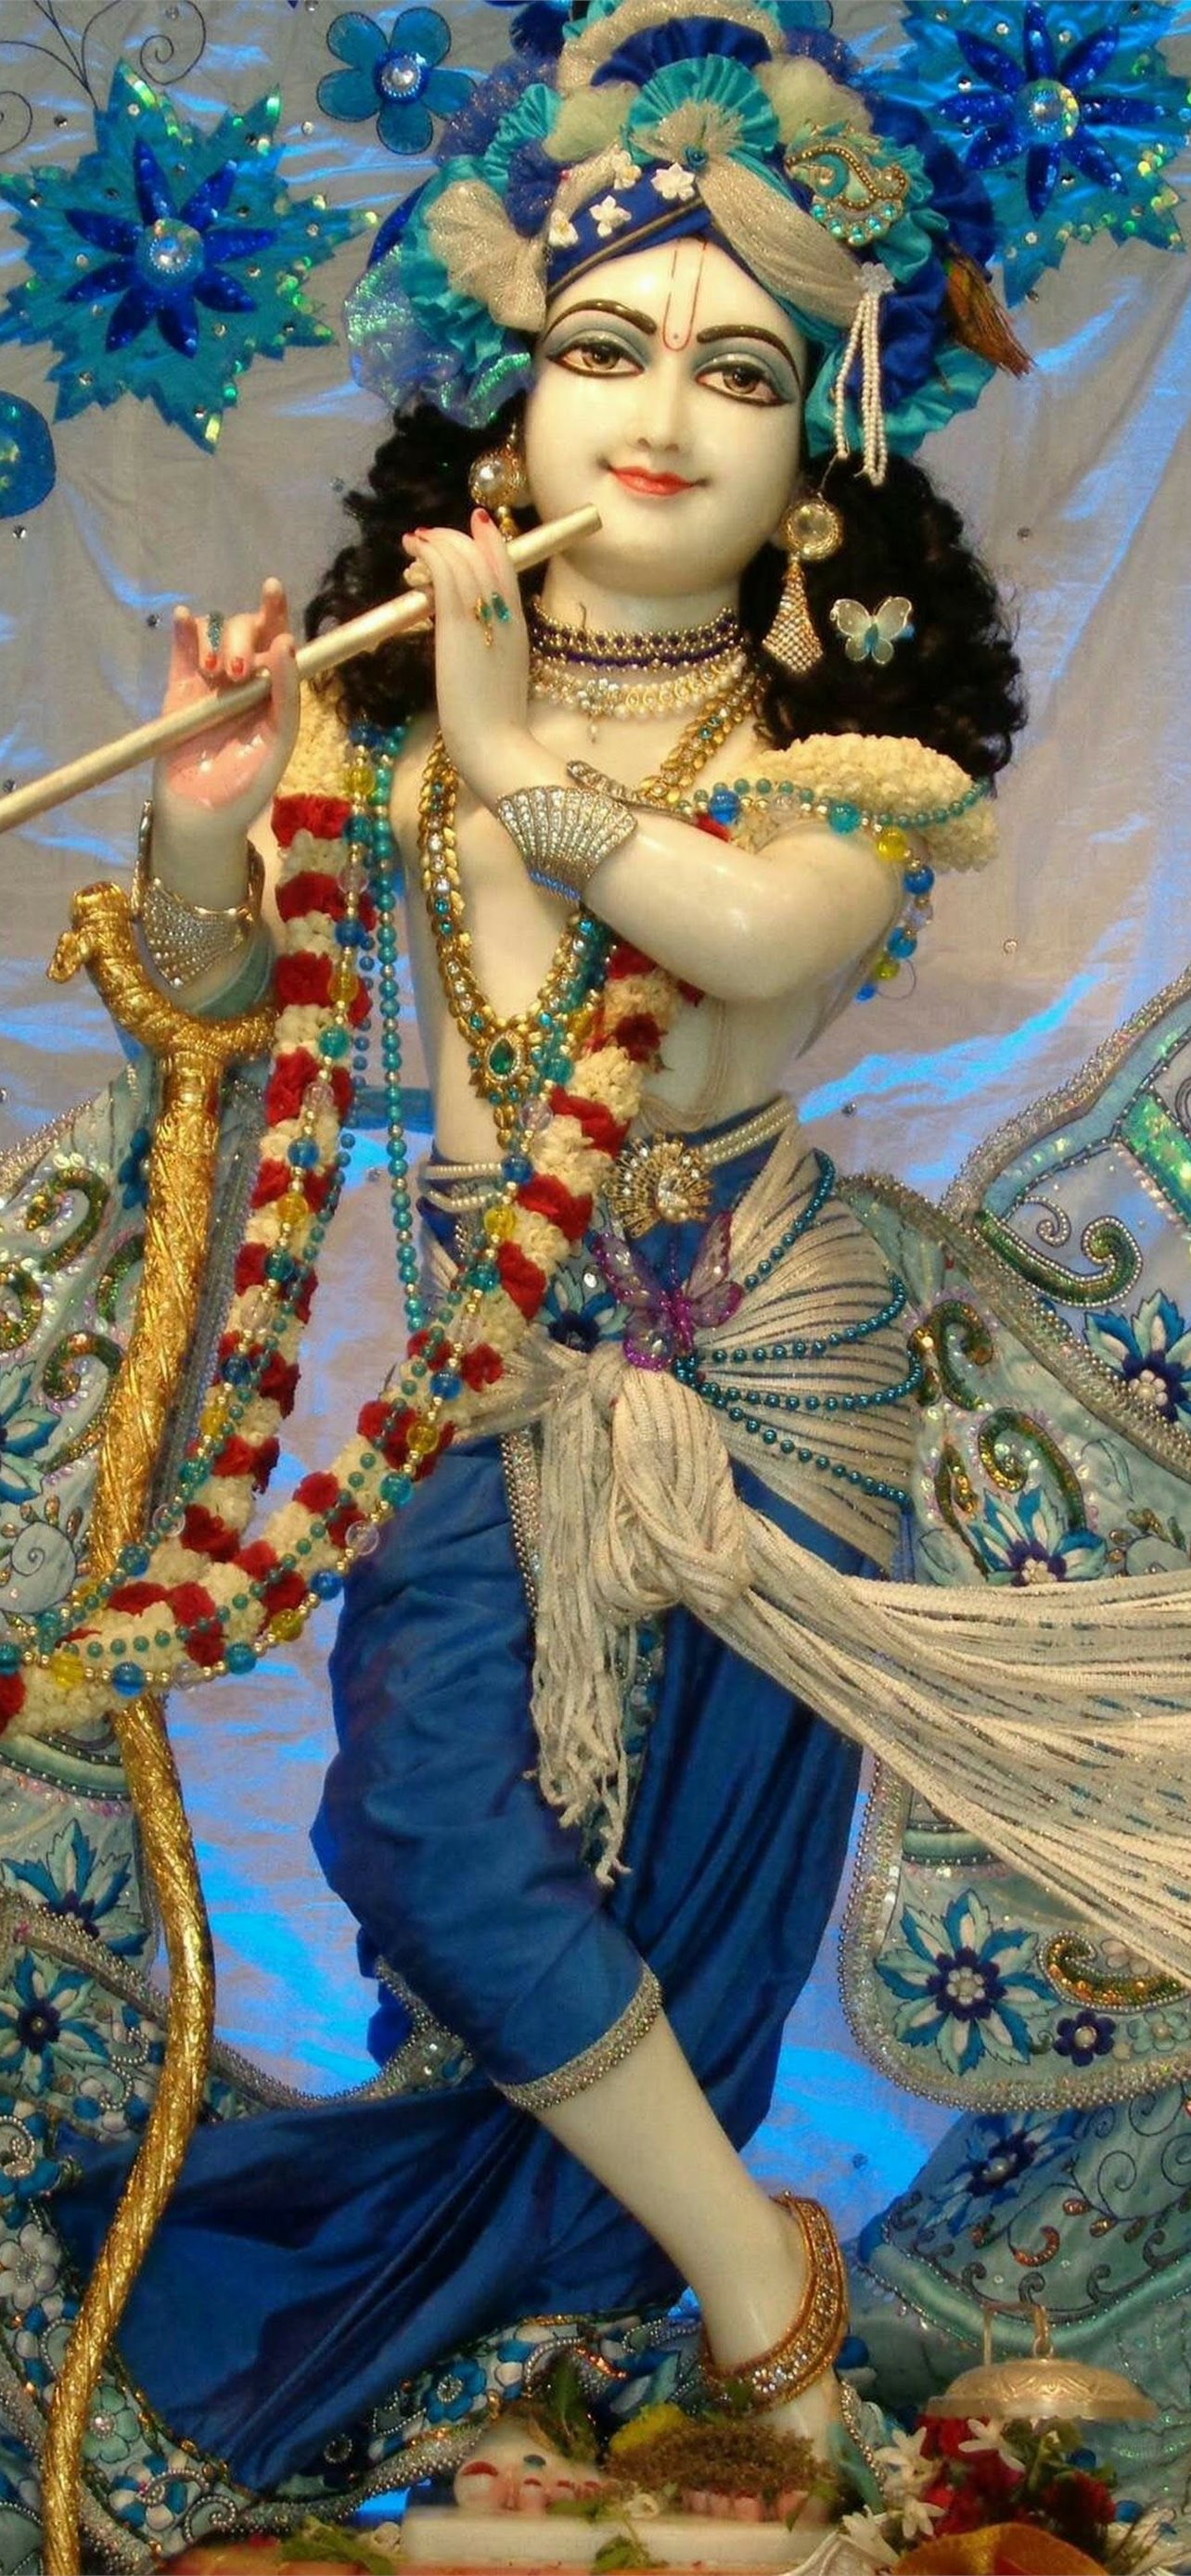  Lord Krishna Painting iPhone Wallpaper HD  MyGodImages